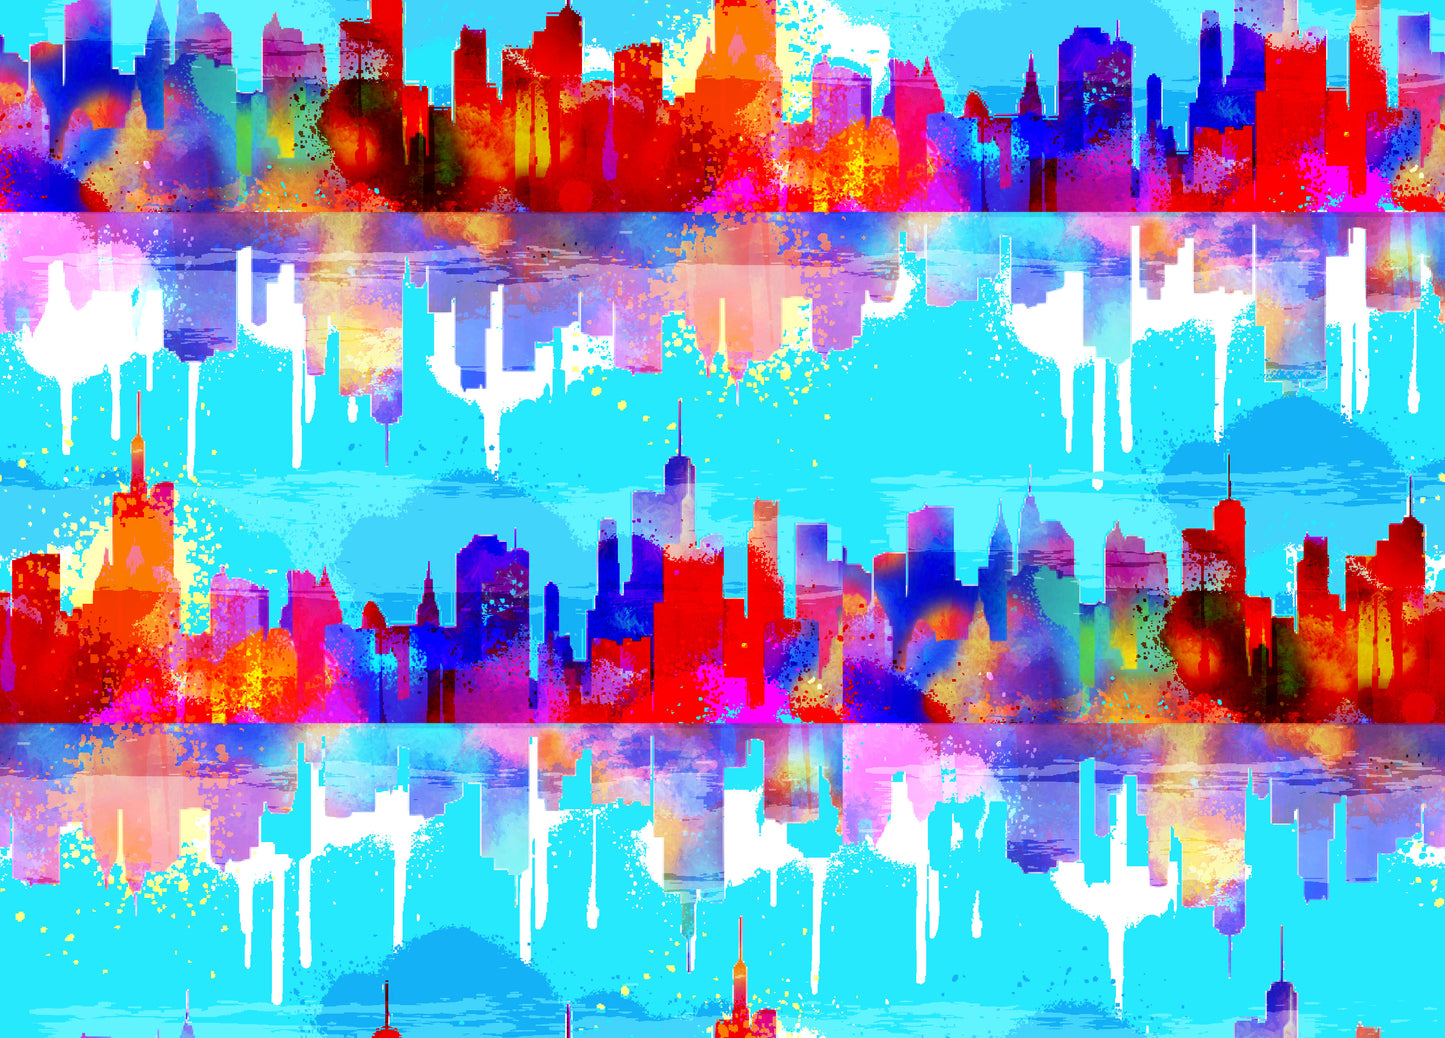 Dogs In The City by Weekday Best Digital Urban Cityscape Turquoise    19139-TRQ-CTN-D Cotton Woven Fabric